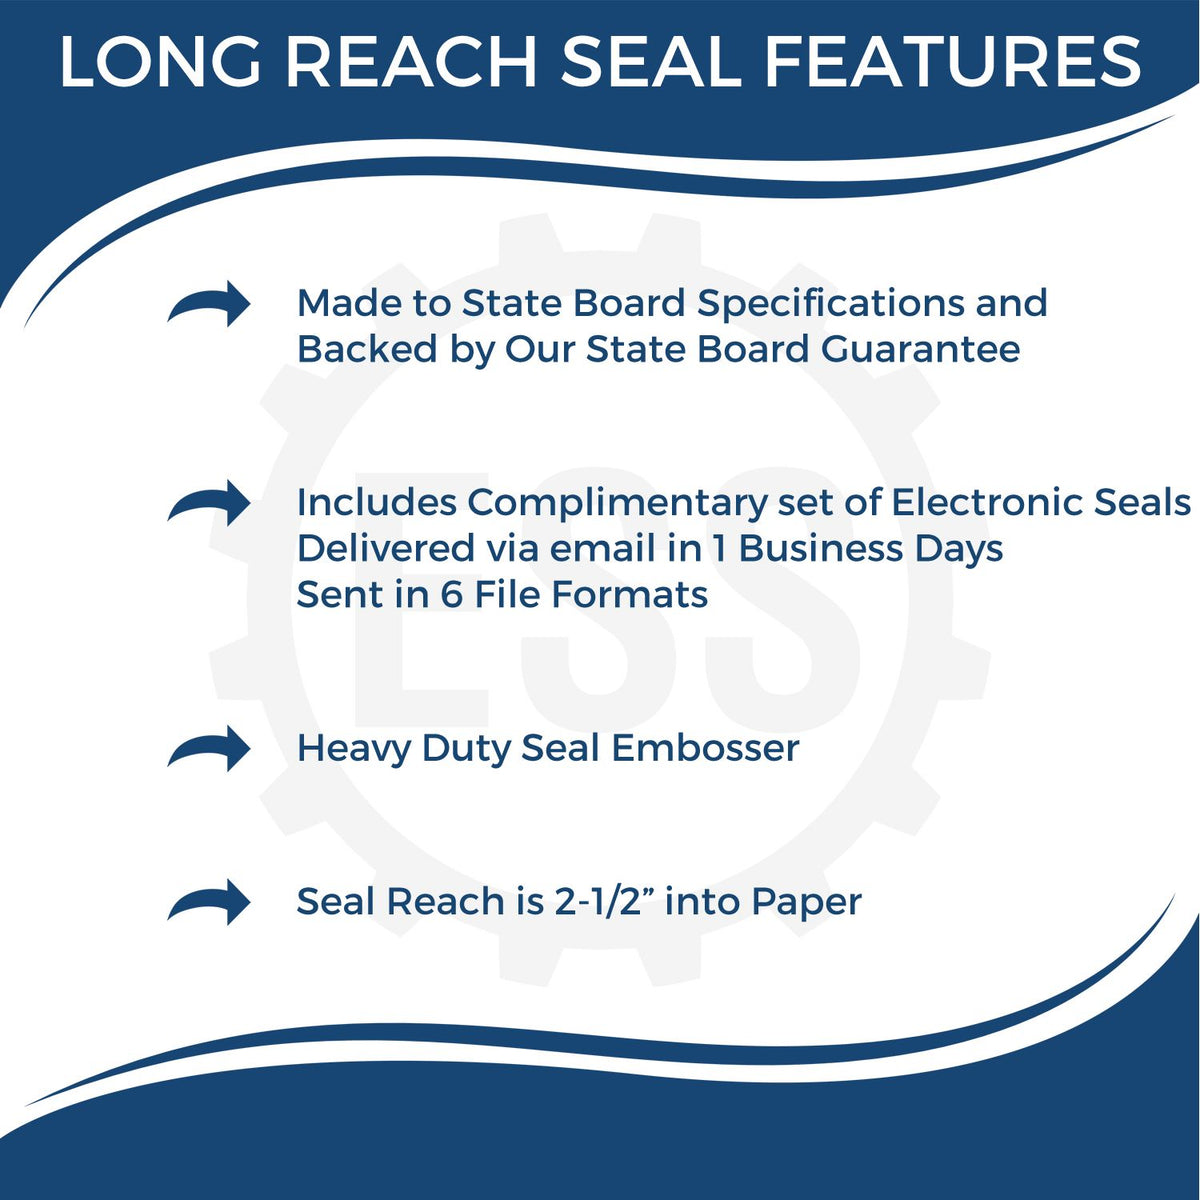 A picture of an infographic highlighting the selling points for the Long Reach Illinois Geology Seal